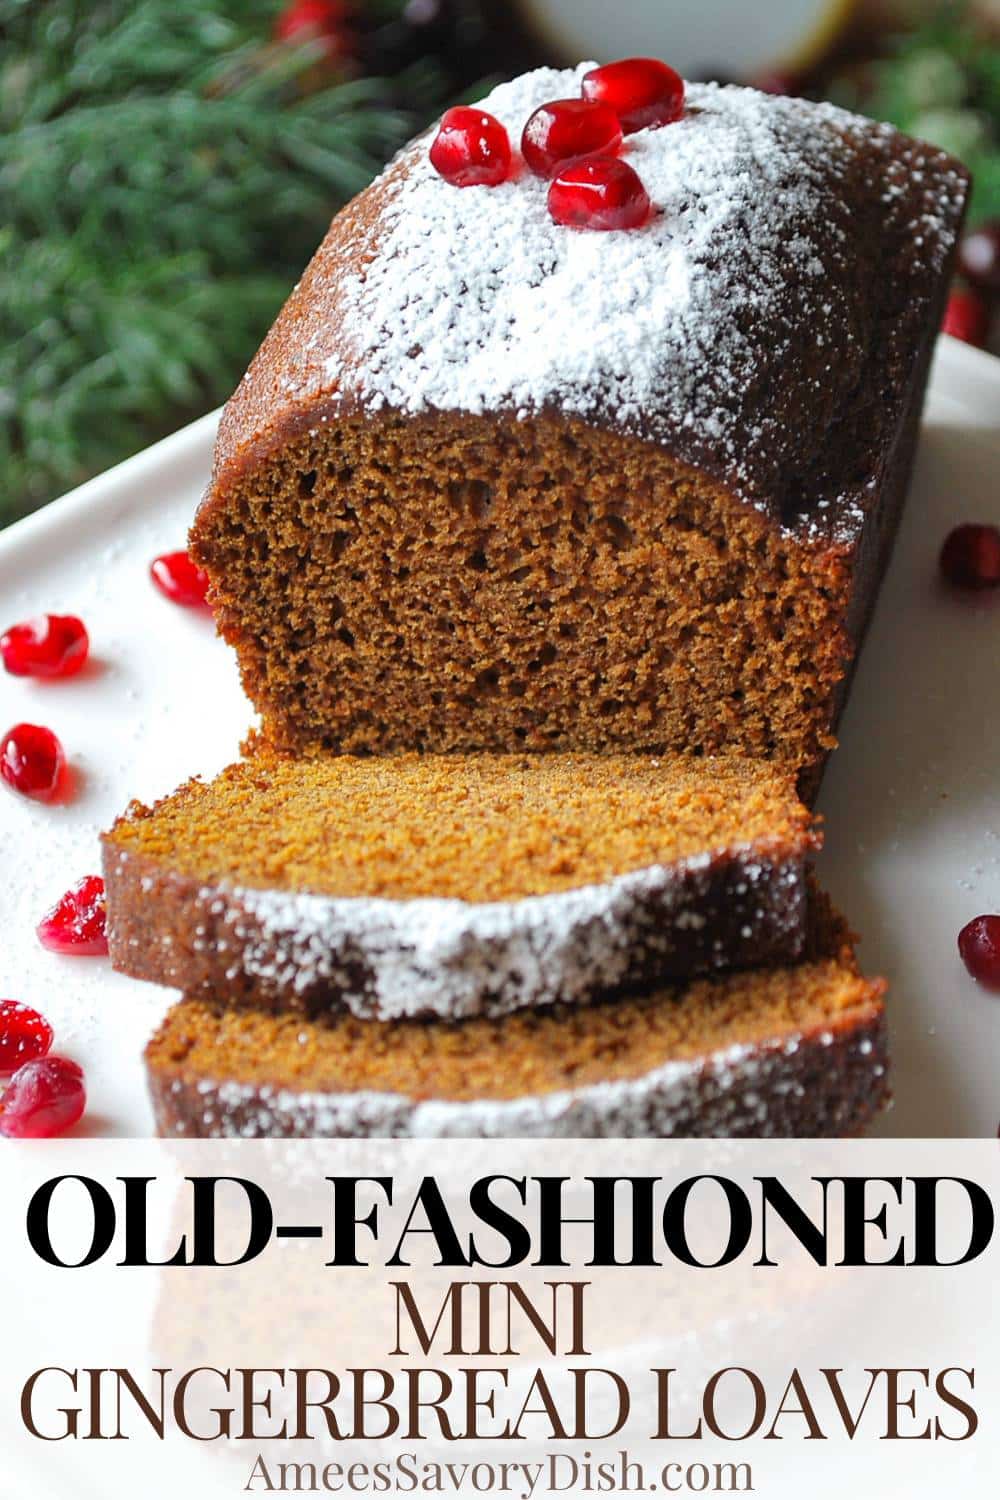 Old-fashioned Mini Gingerbread Loaves! Sweetened and spiced to perfection with rich molasses, cloves, ginger, cinnamon, and nutmeg. via @Ameessavorydish